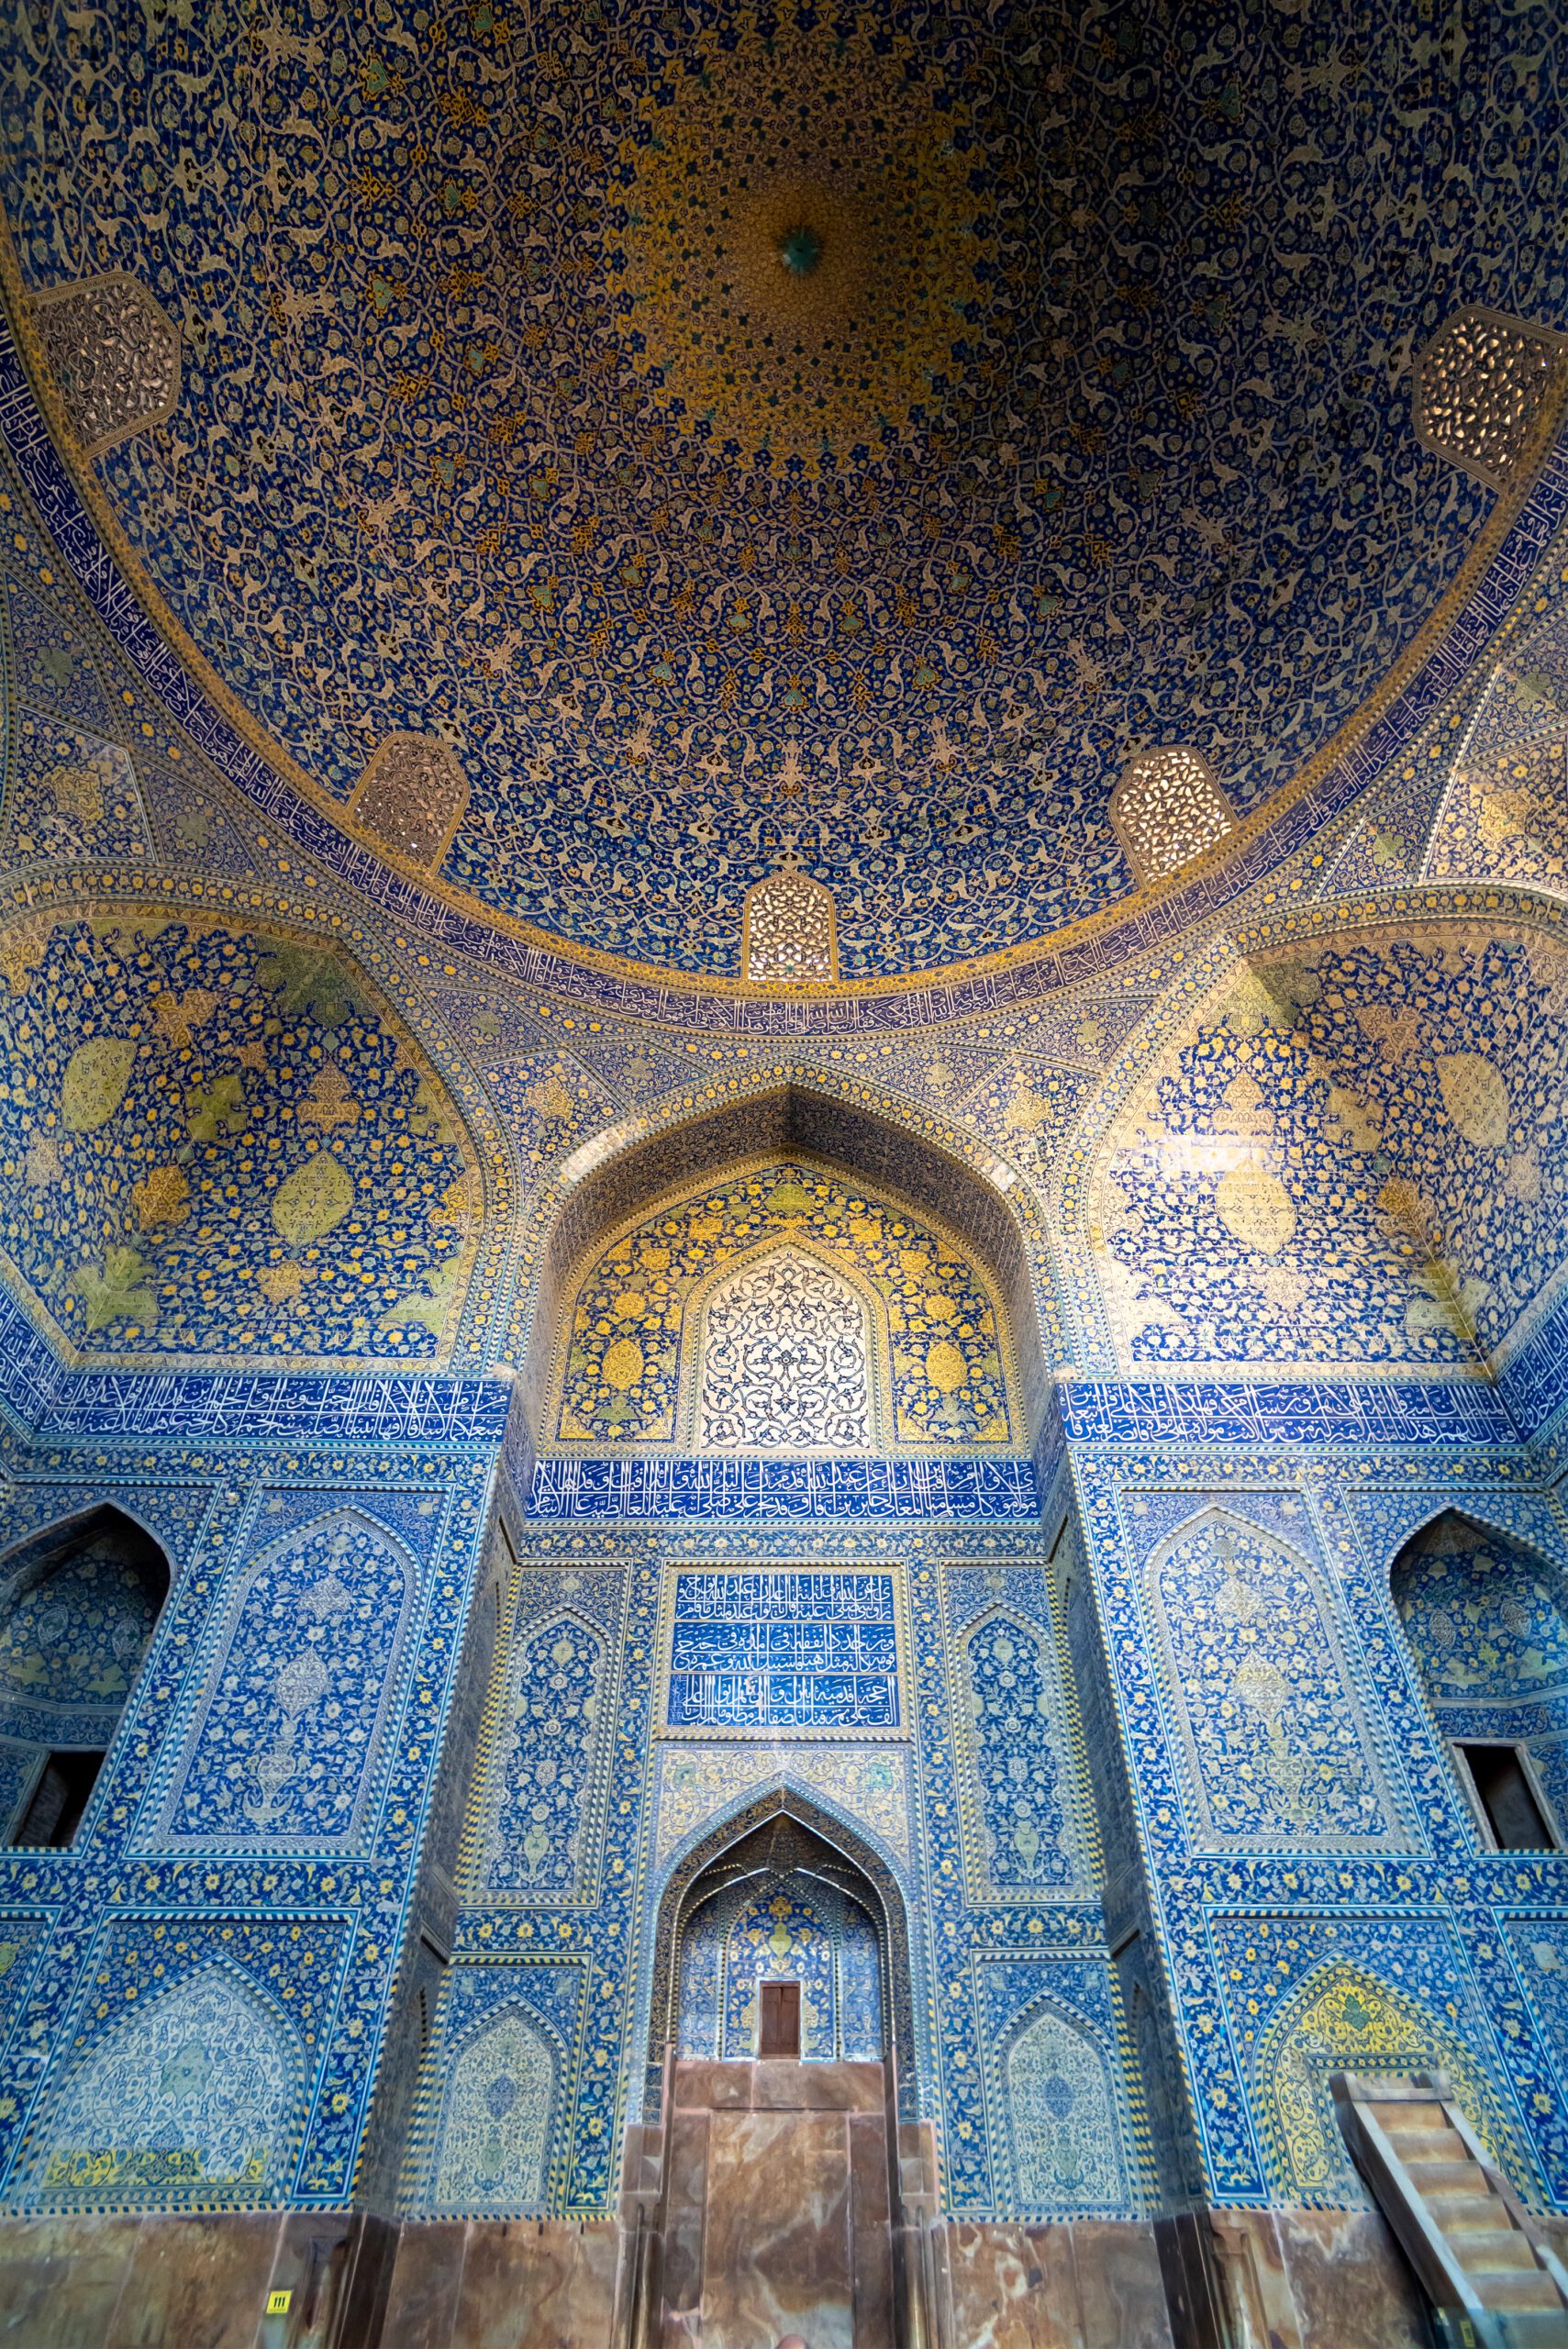 Tilework on walls of Imam Mosque, Imam Square in Isfahan, Iran